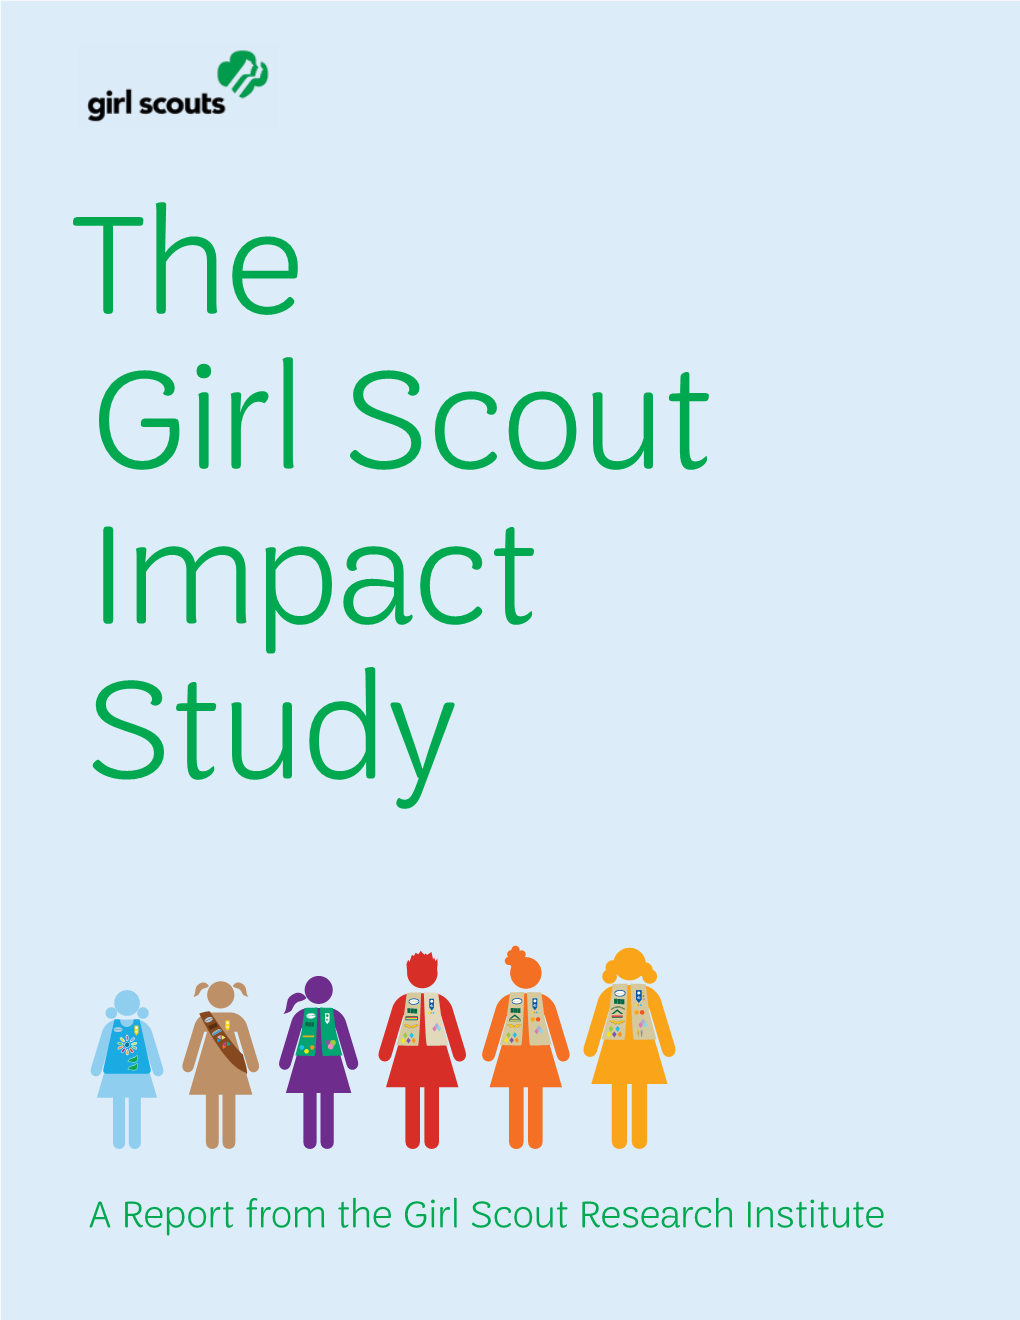 The Girl Scout Impact Study